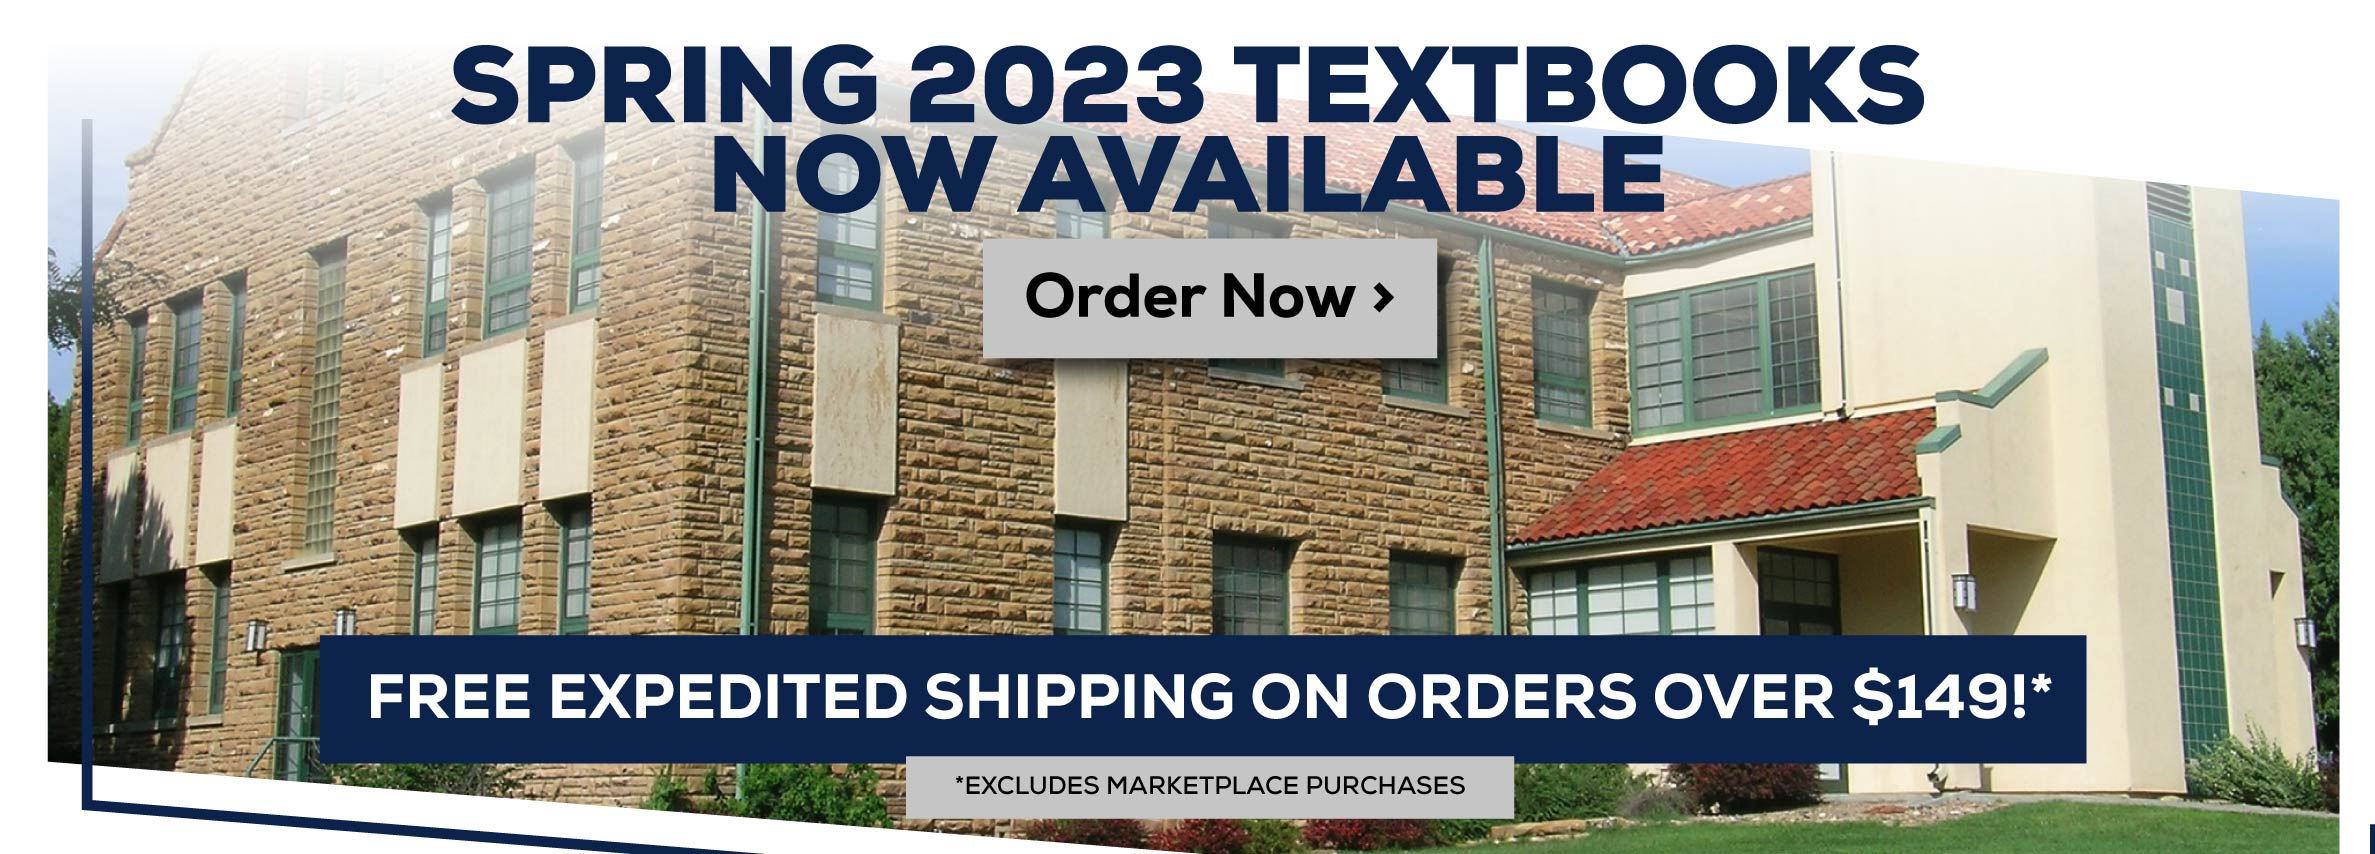 Spring 2023 Textbooks Now Available Order Now - Free Expedited Shipping on orders over $149!*!* Excludes Marketplace Purchases